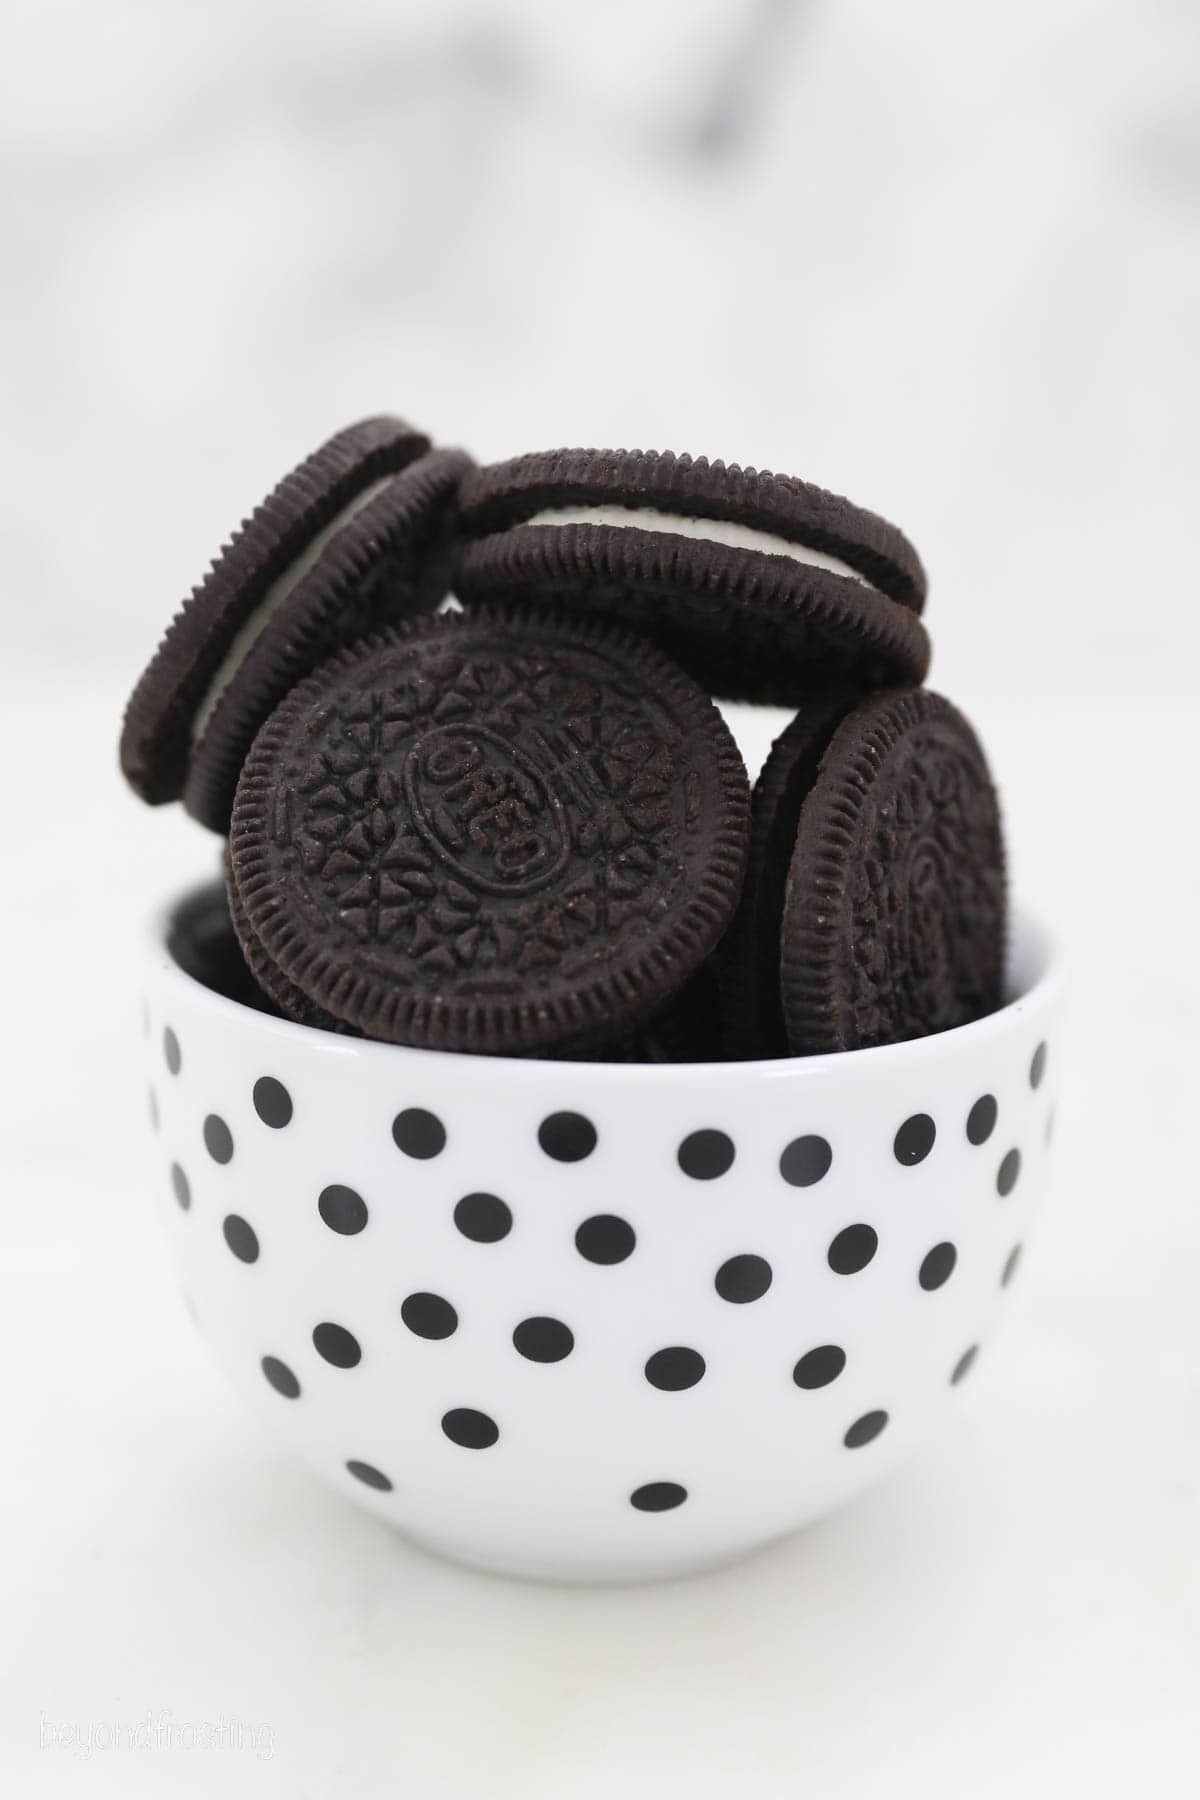 Oreo cookies stacked in a white bowl with black polka dots.